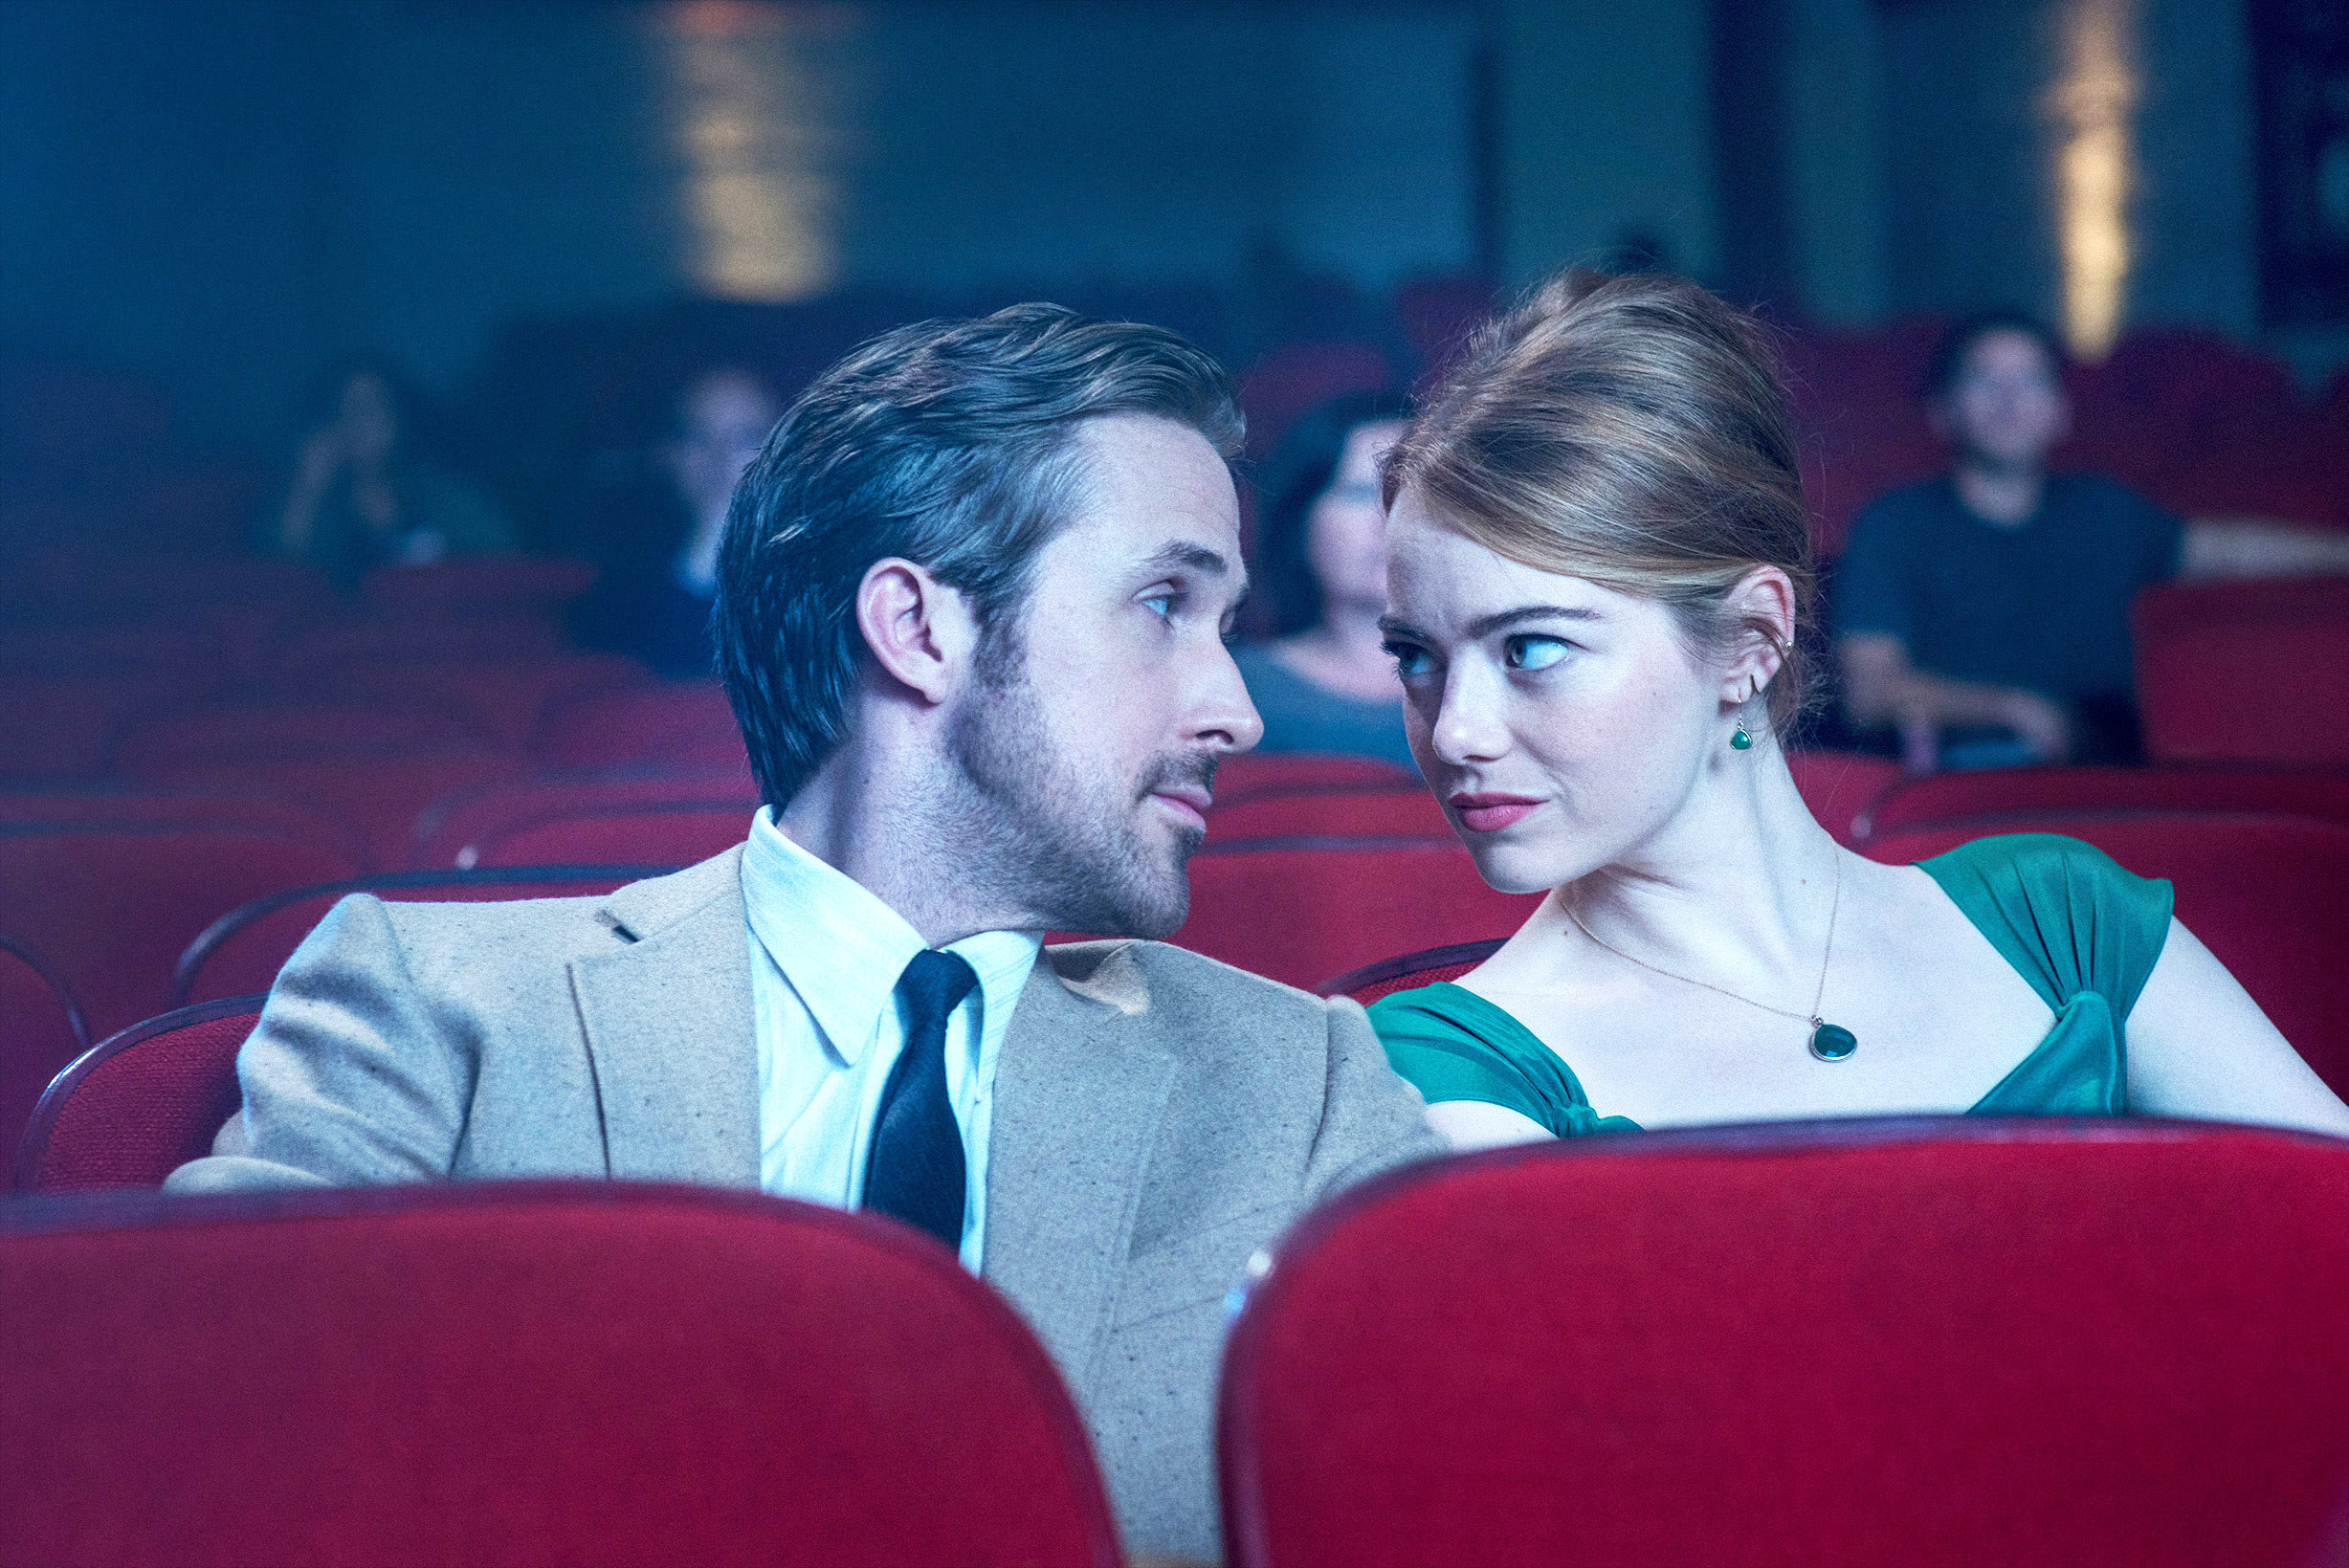 Ryan Gosling and Emma Stone sit in a movie theater